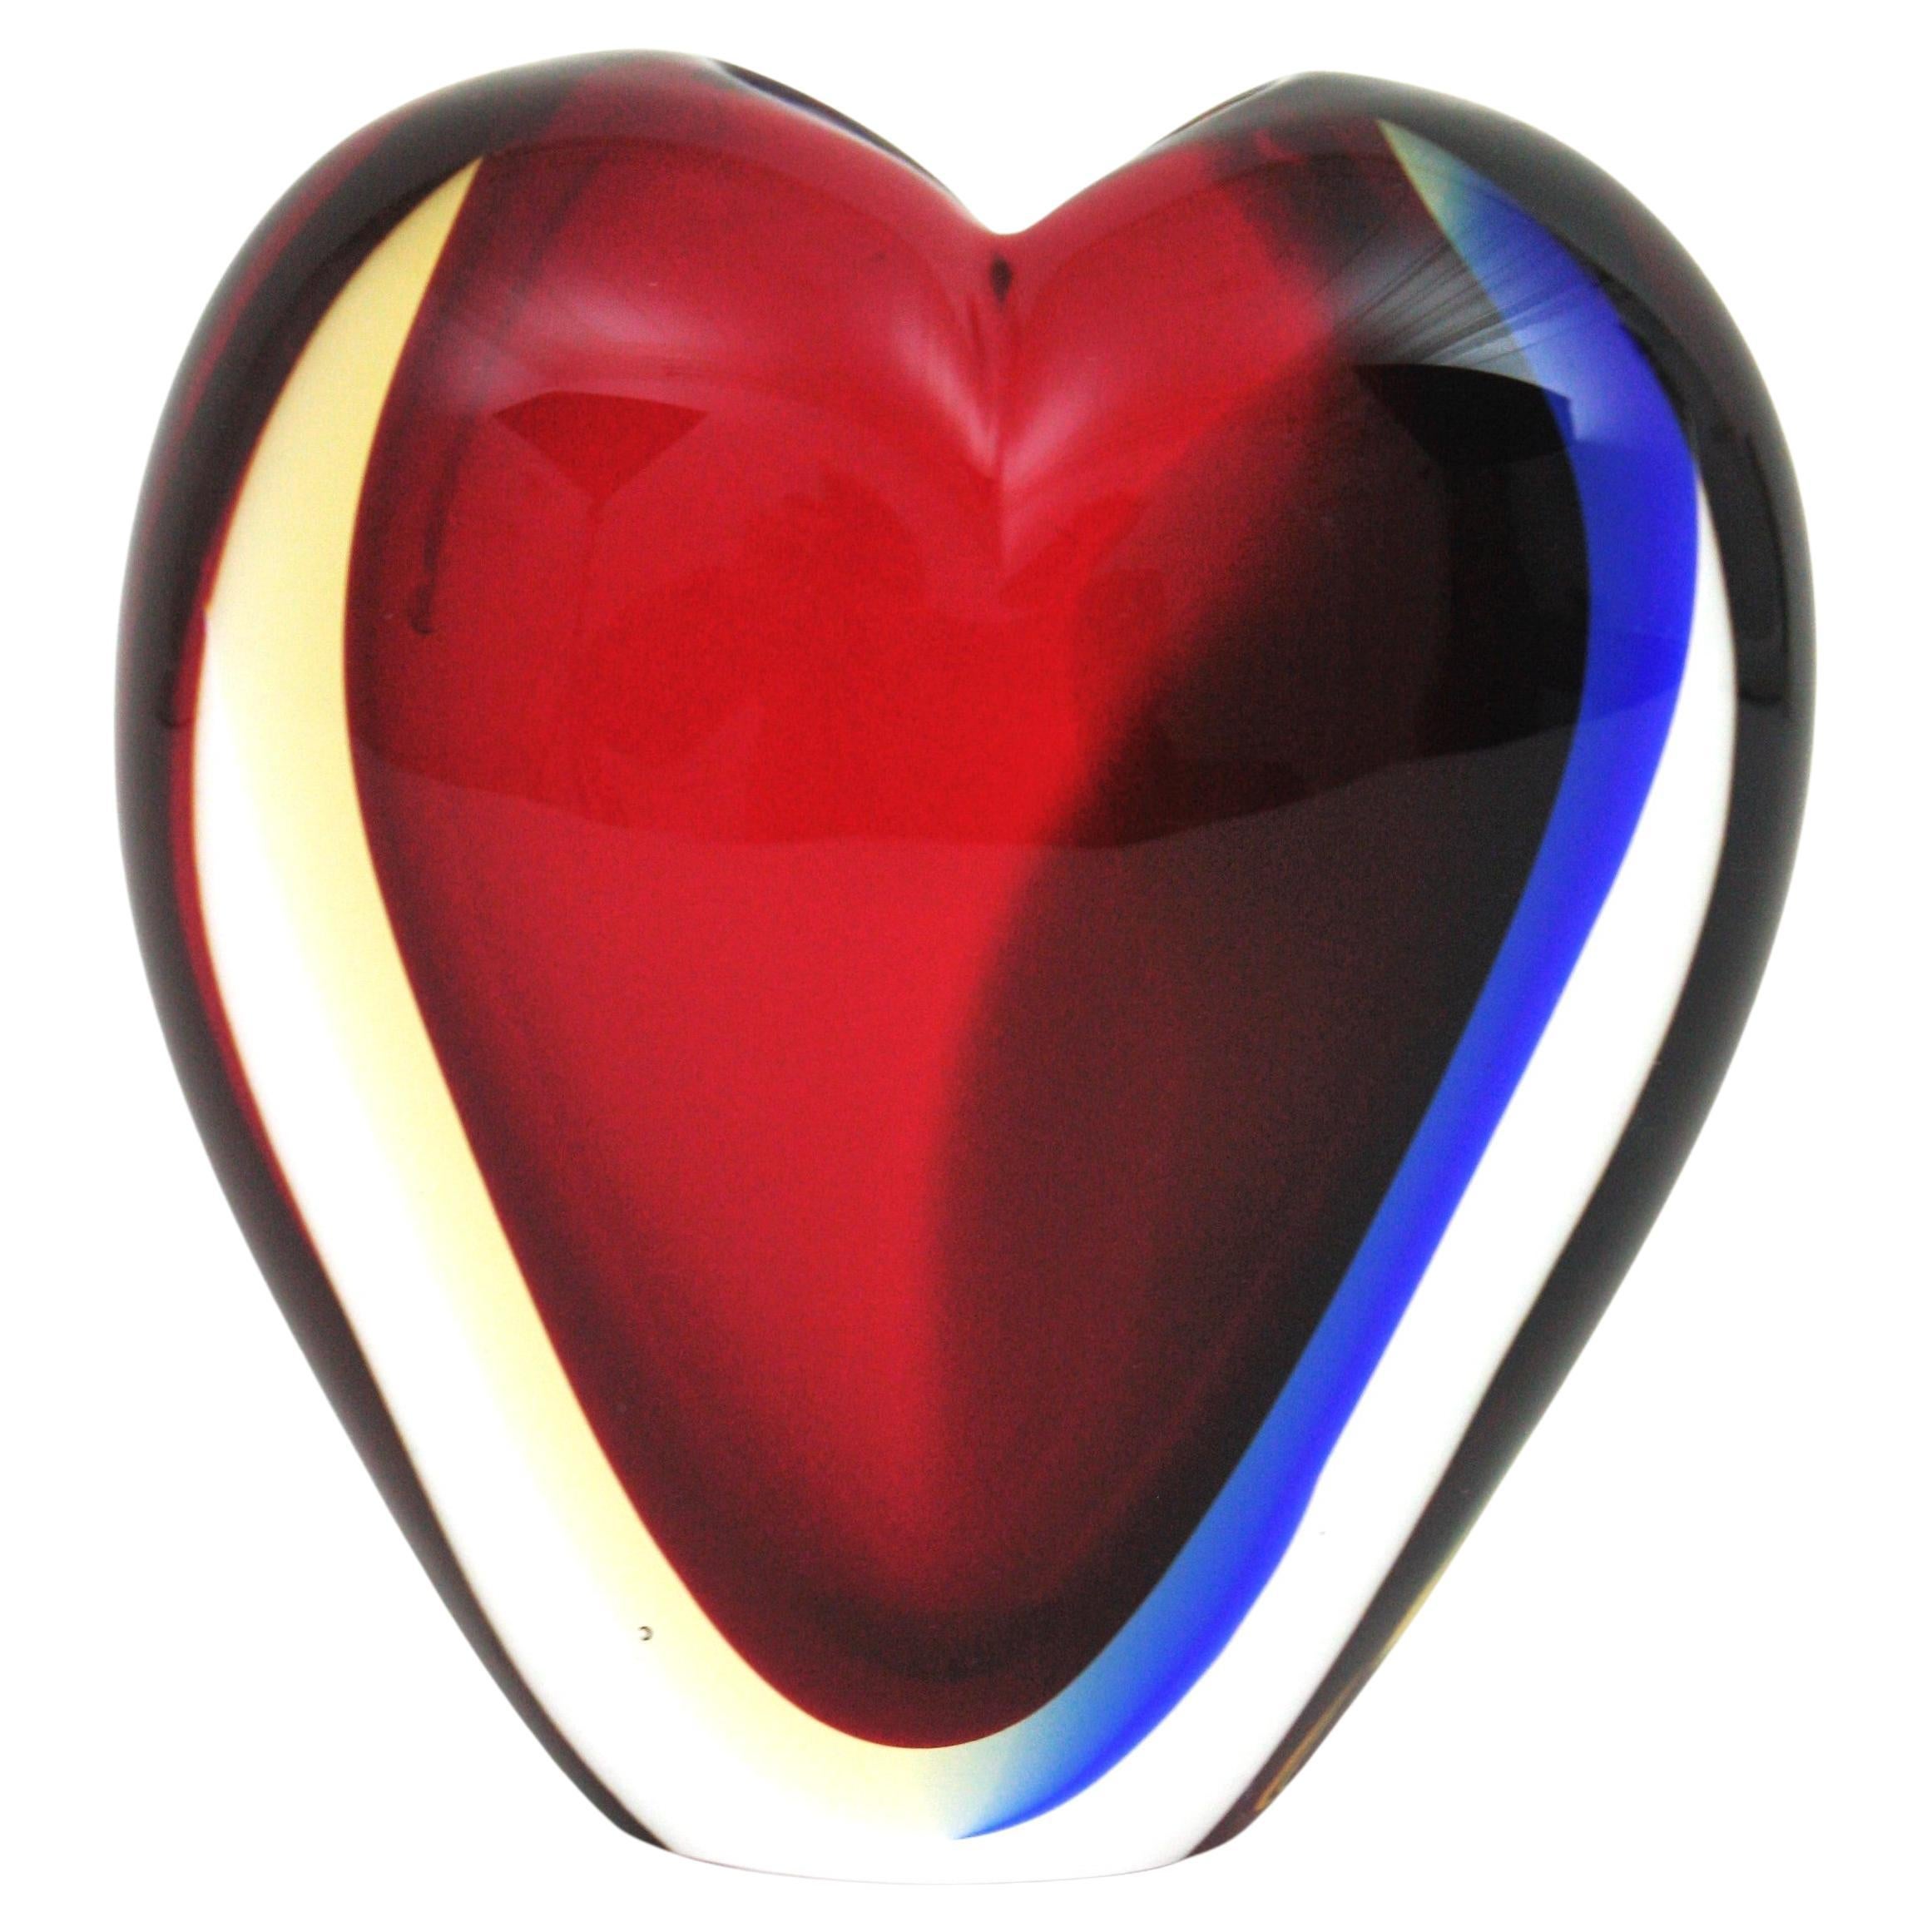 Signed Murano Art Glass Heart Shaped Sommerso Vase, Luigi Onesto for Vetreria Artistica Oball, Italy, 1960s.
Eye-catching colorful sommerso glass heart vase with small heart shaped opening on top.  
Beautifully created in a combination of red glass